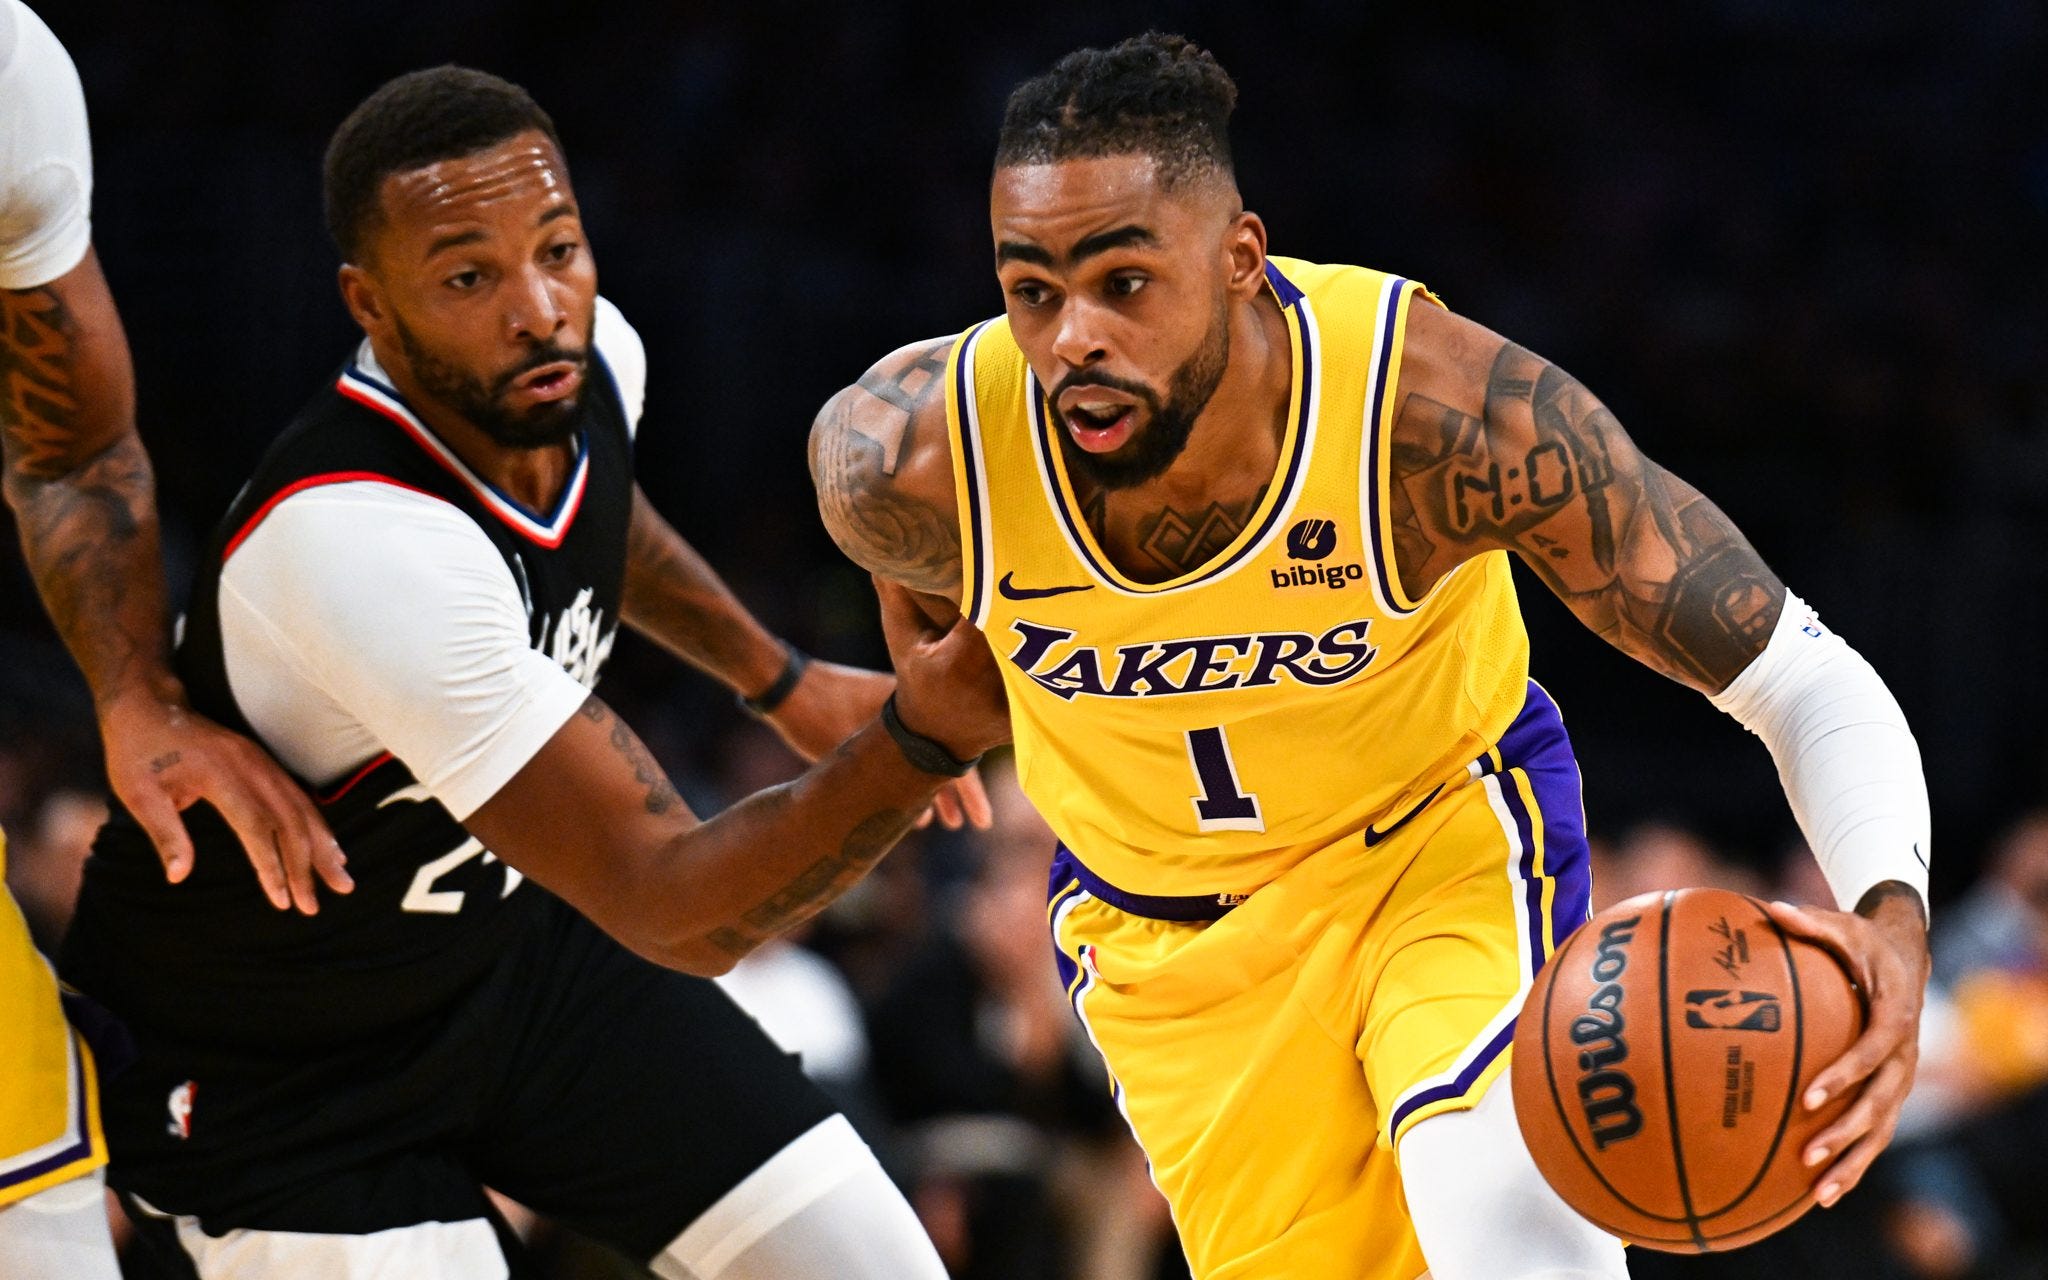 los angeles lakers at la clippers odds, picks and predictions